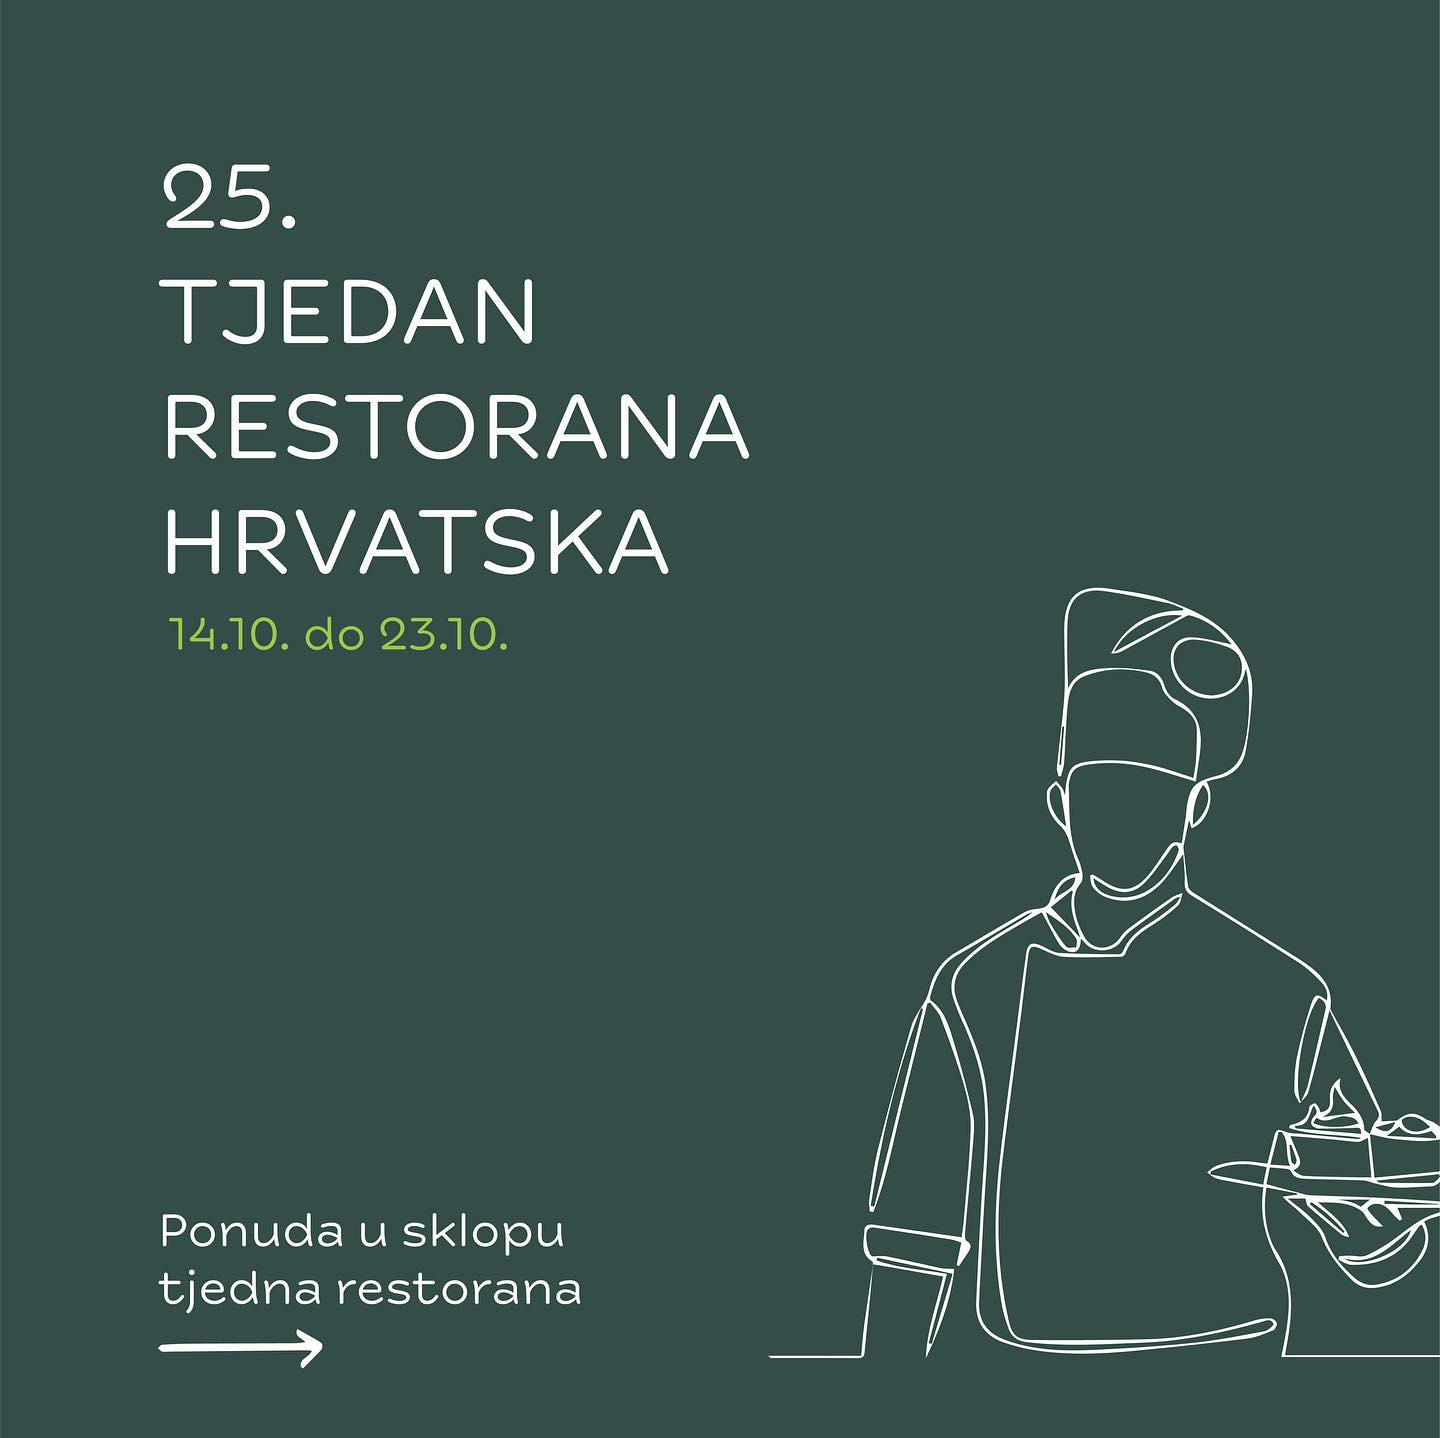 You are currently viewing 25. Tjedan restorana